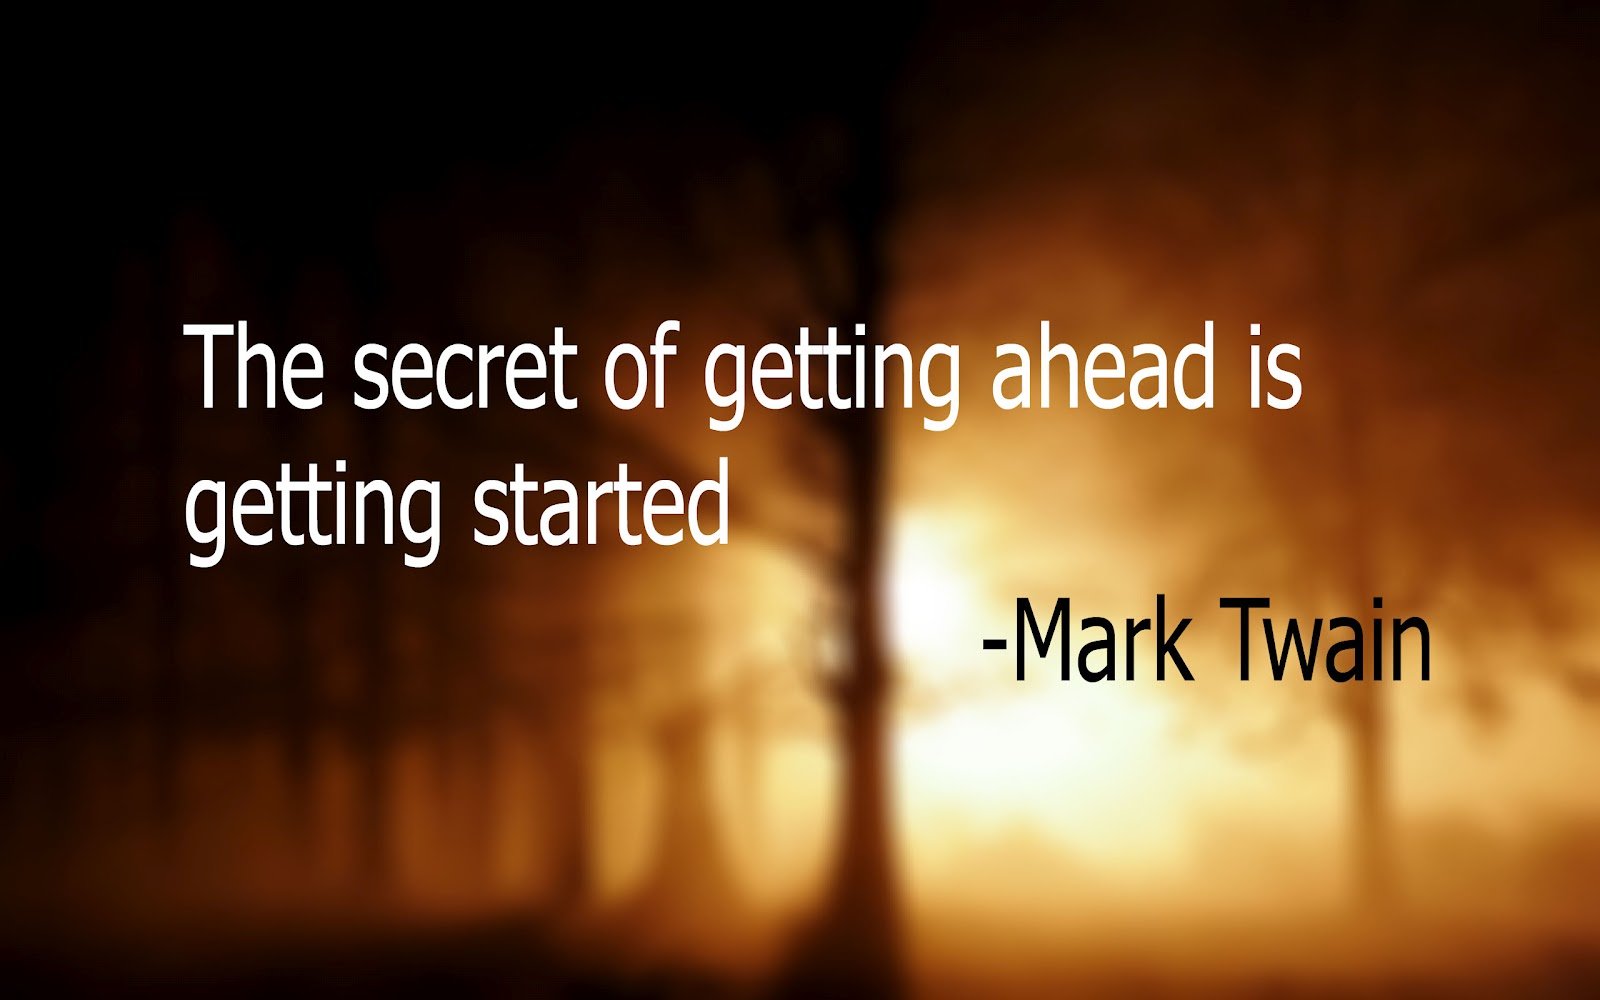  hd wallpapers and images download secret of success wallpapers 1600x1000